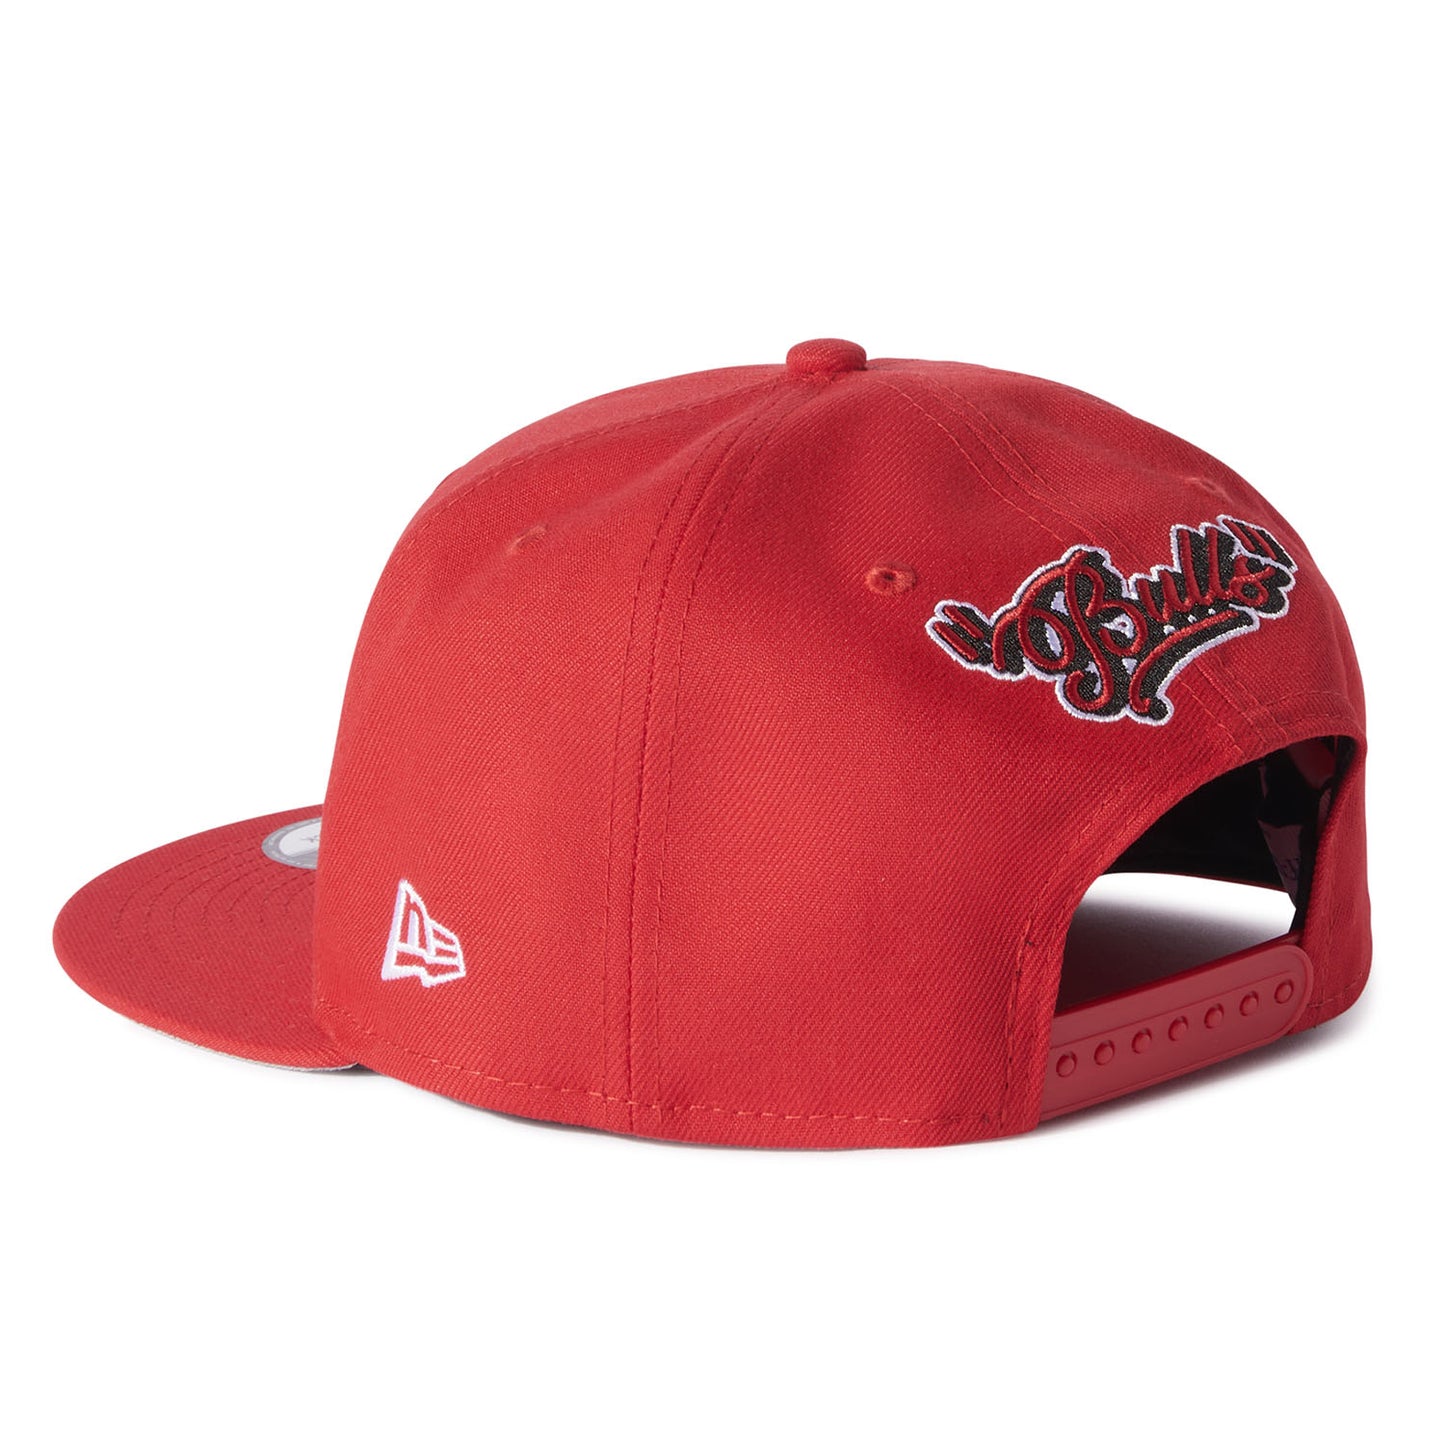 Chicago Bulls New Era Off-White Hat - Red - side view